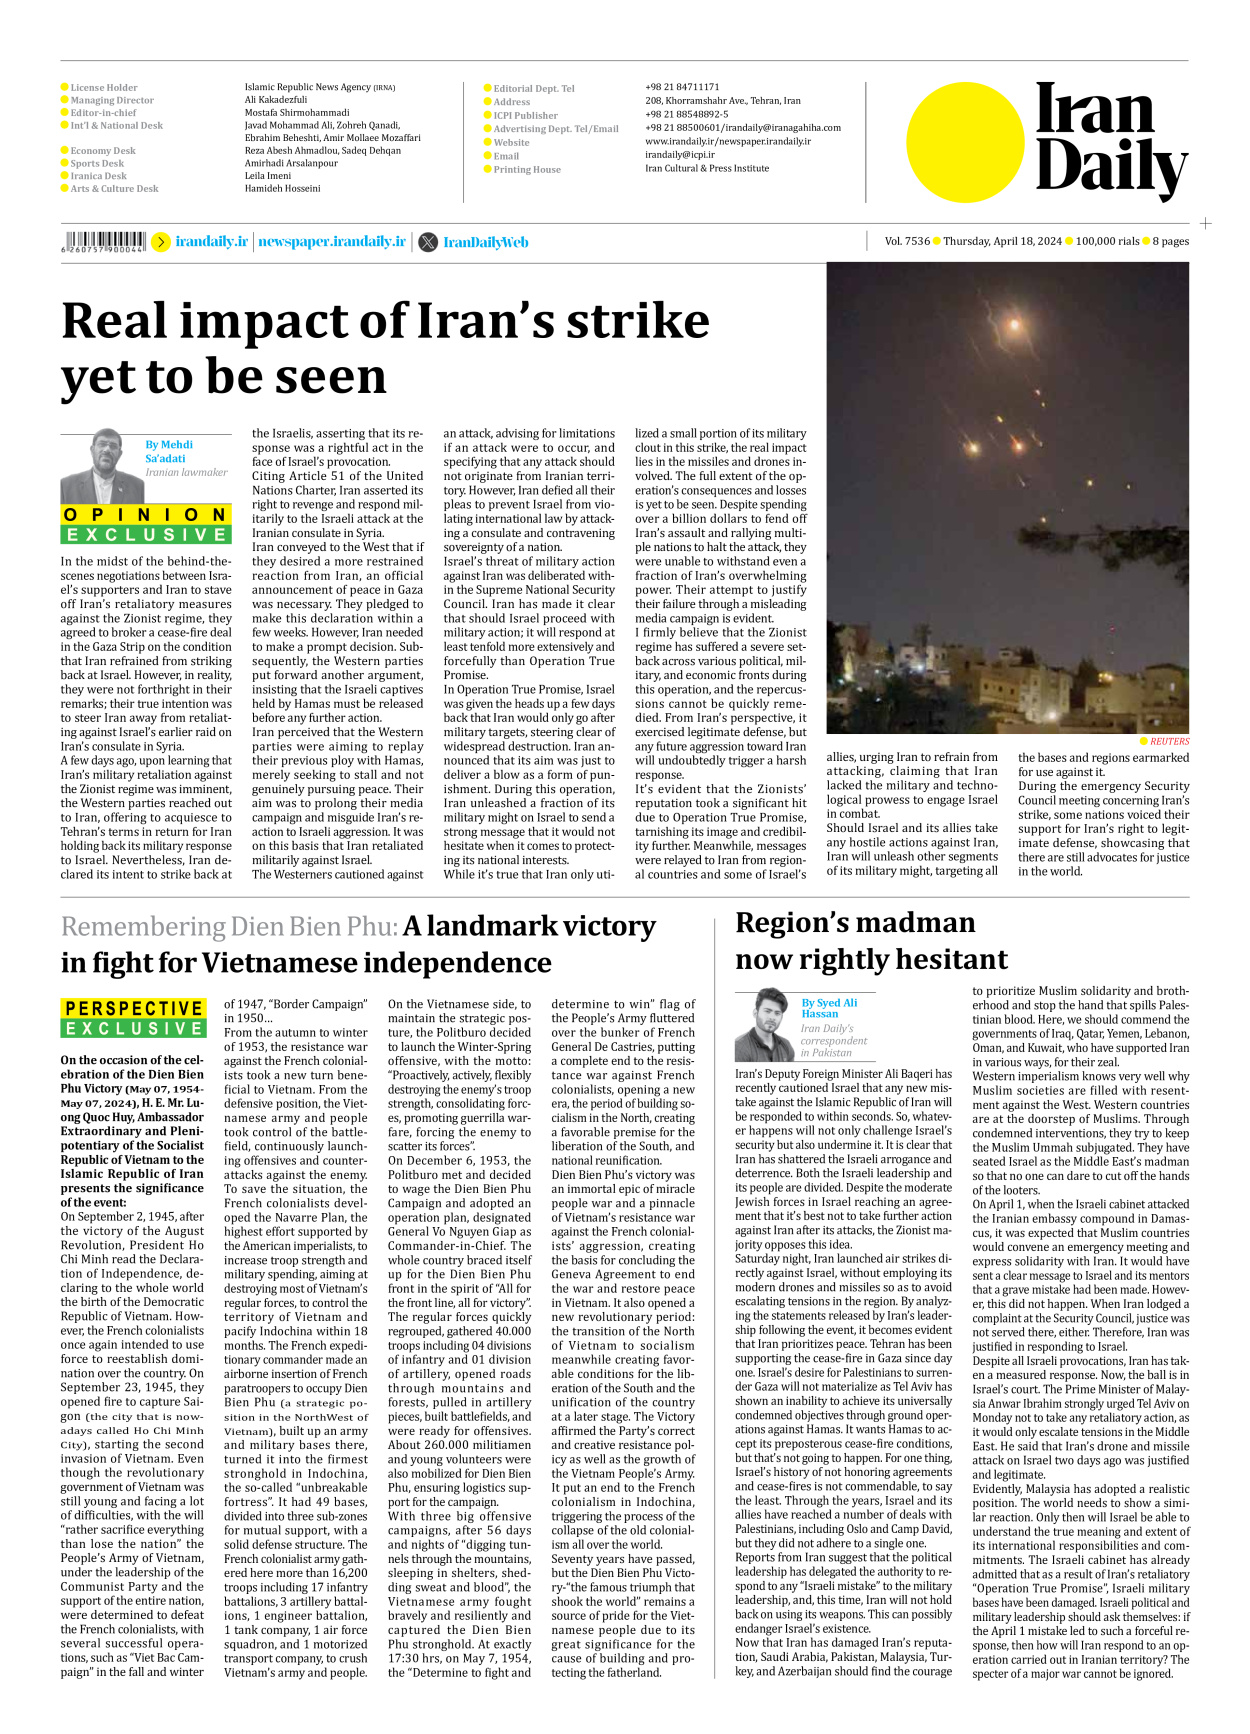 Iran Daily - Number Seven Thousand Five Hundred and Thirty Six - 18 April 2024 - Page 8